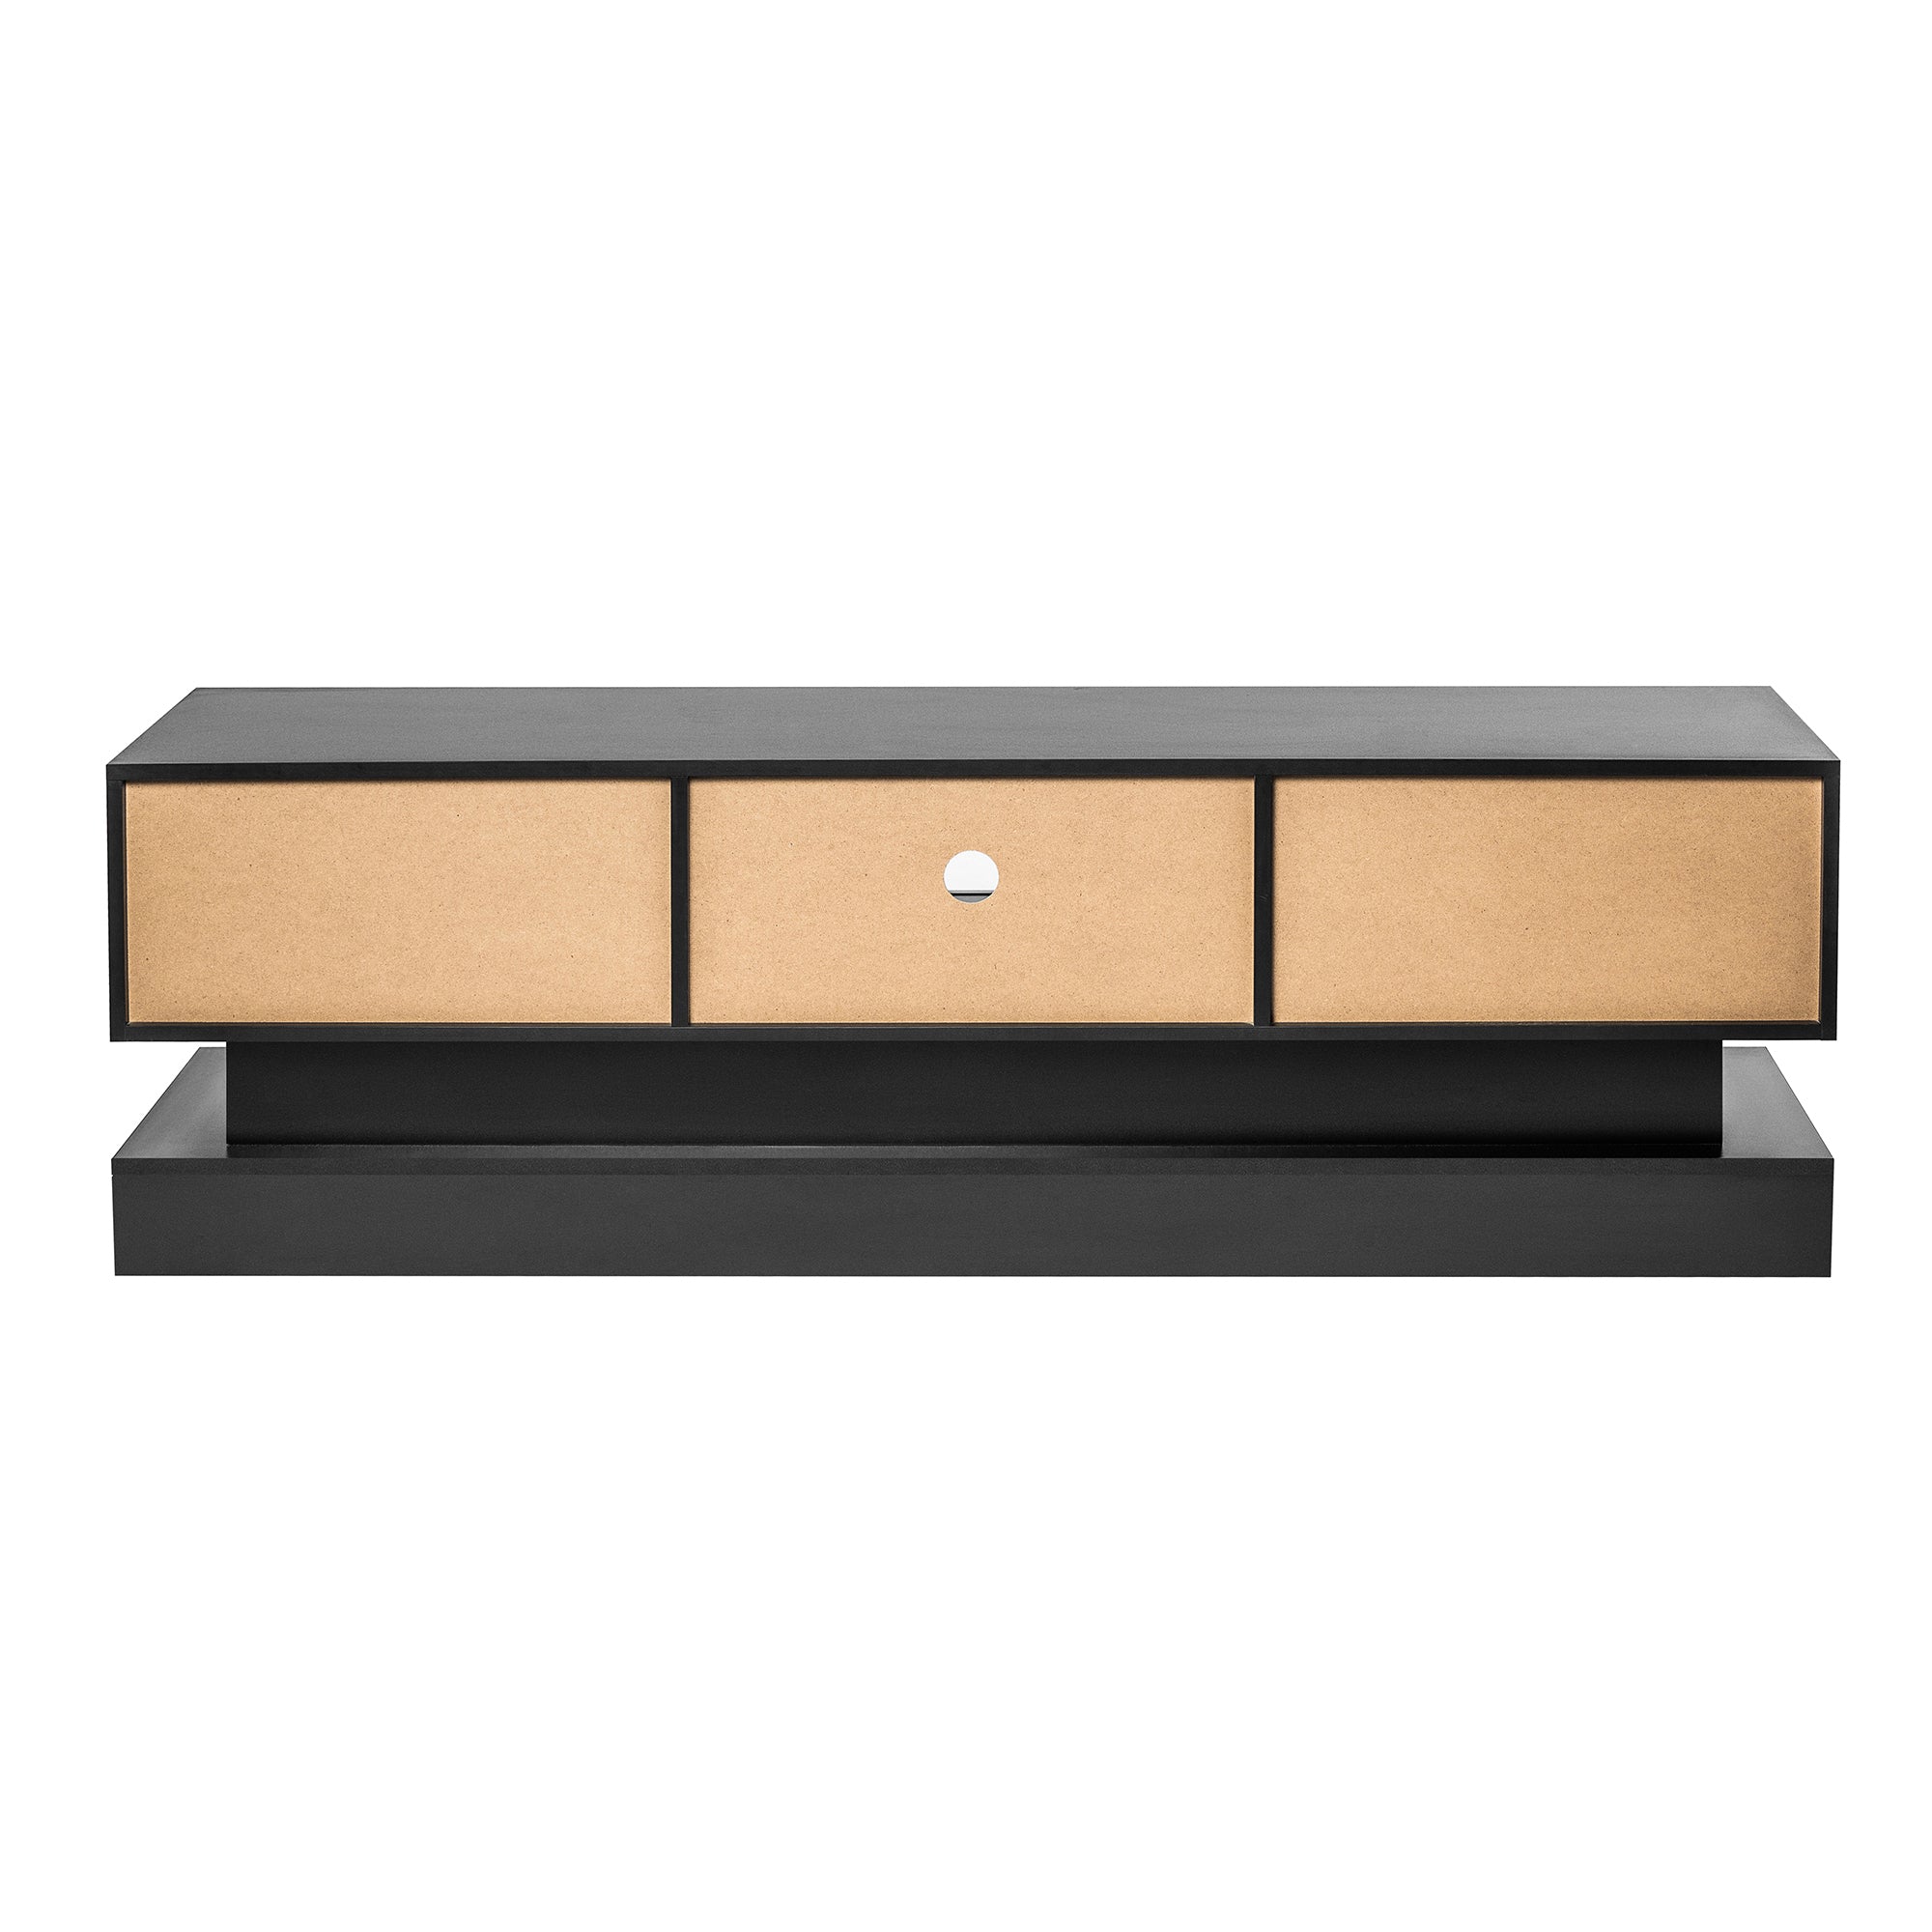 63inch BLACK morden TV Stand with LED Lights,high black-primary living space-60 inches-60-69